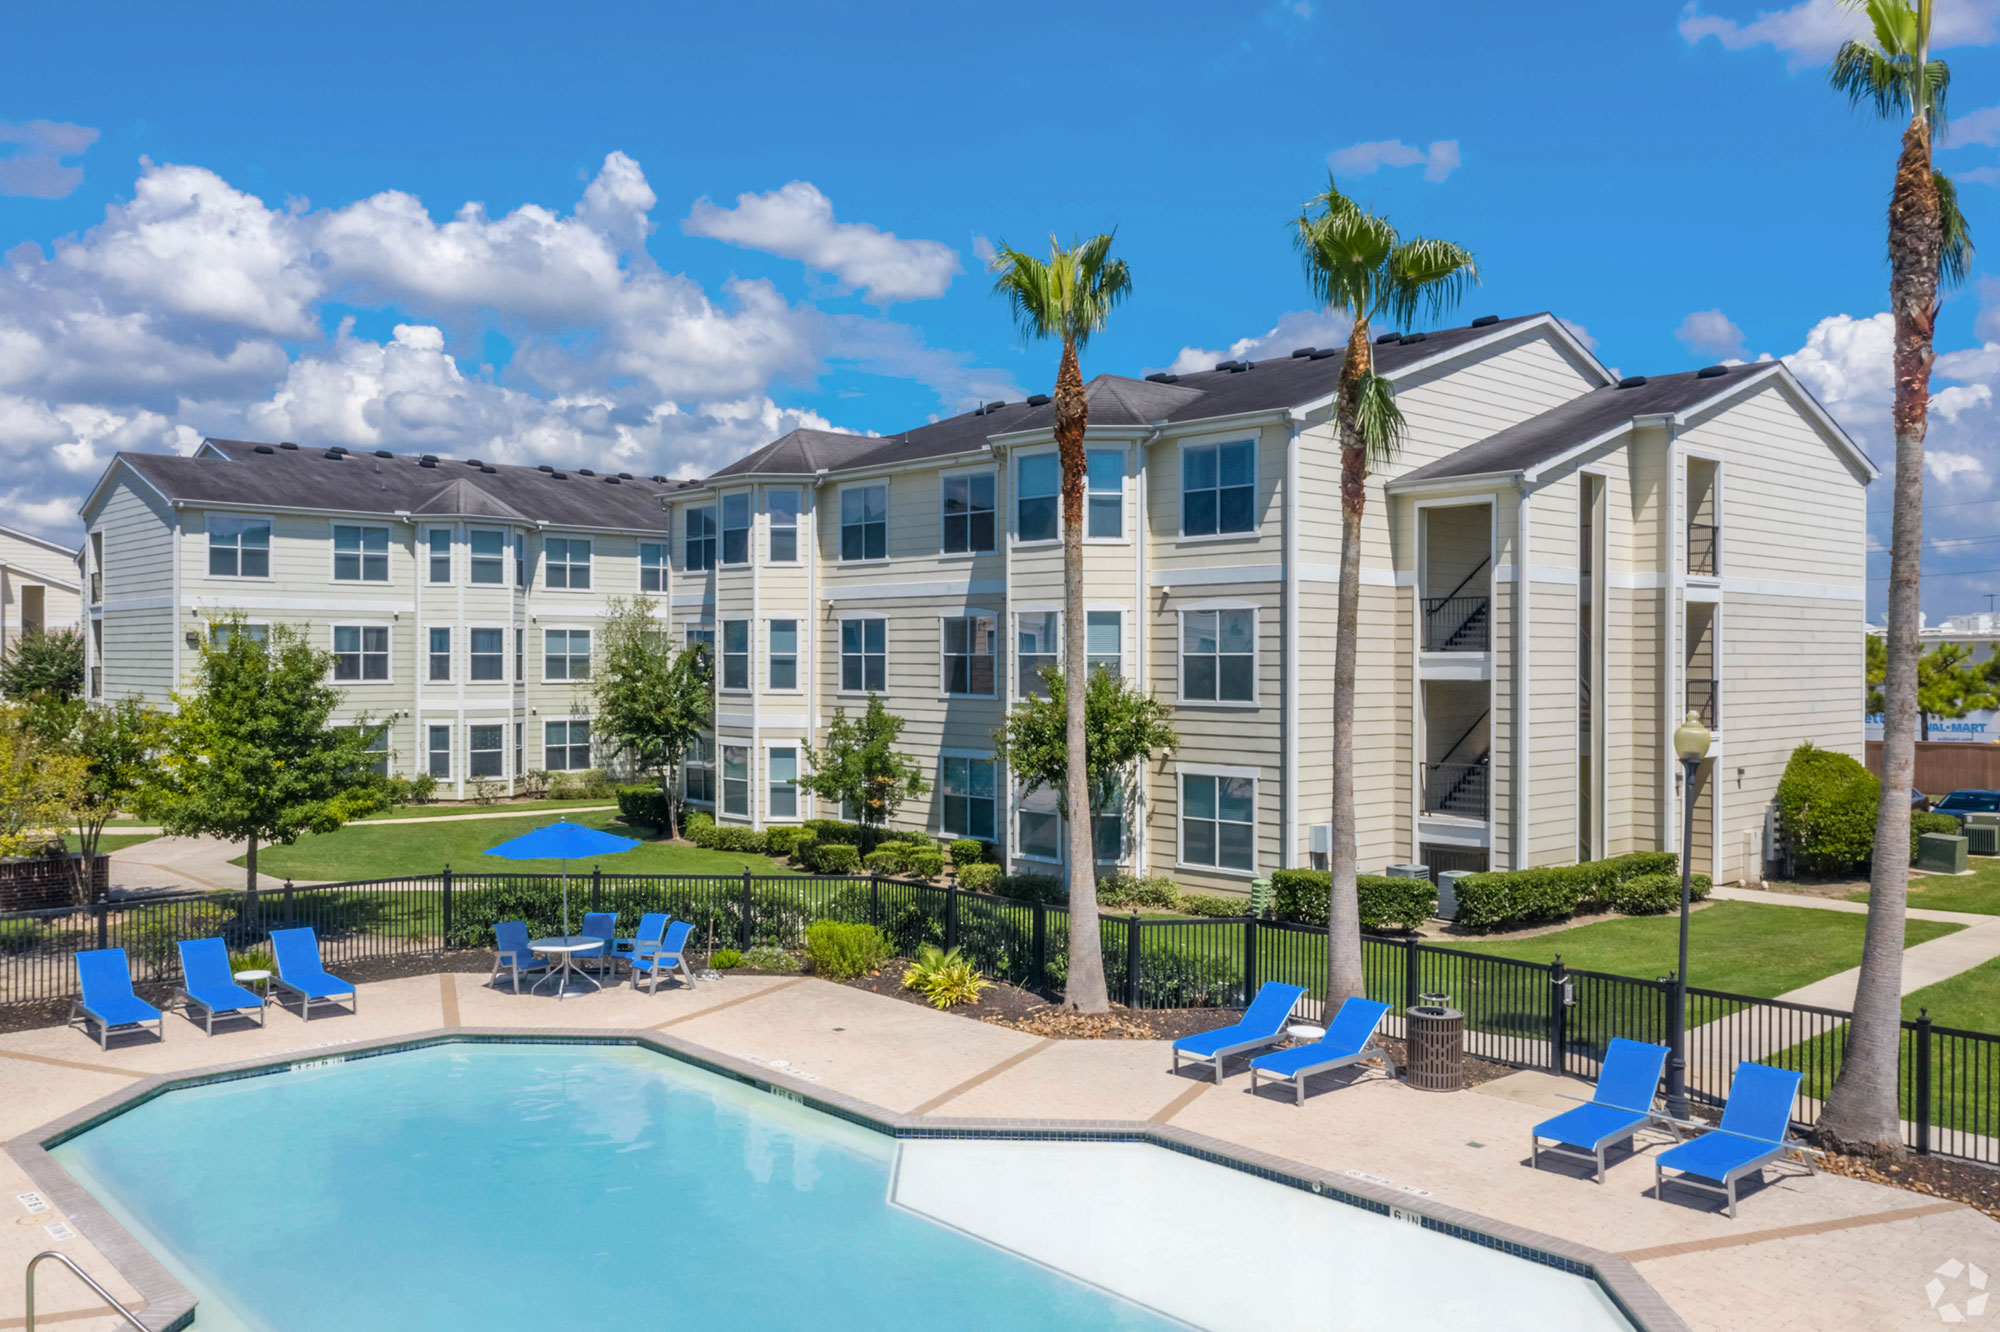 Ascenda Capital acquires Two Class A Apartment Communities in Houston